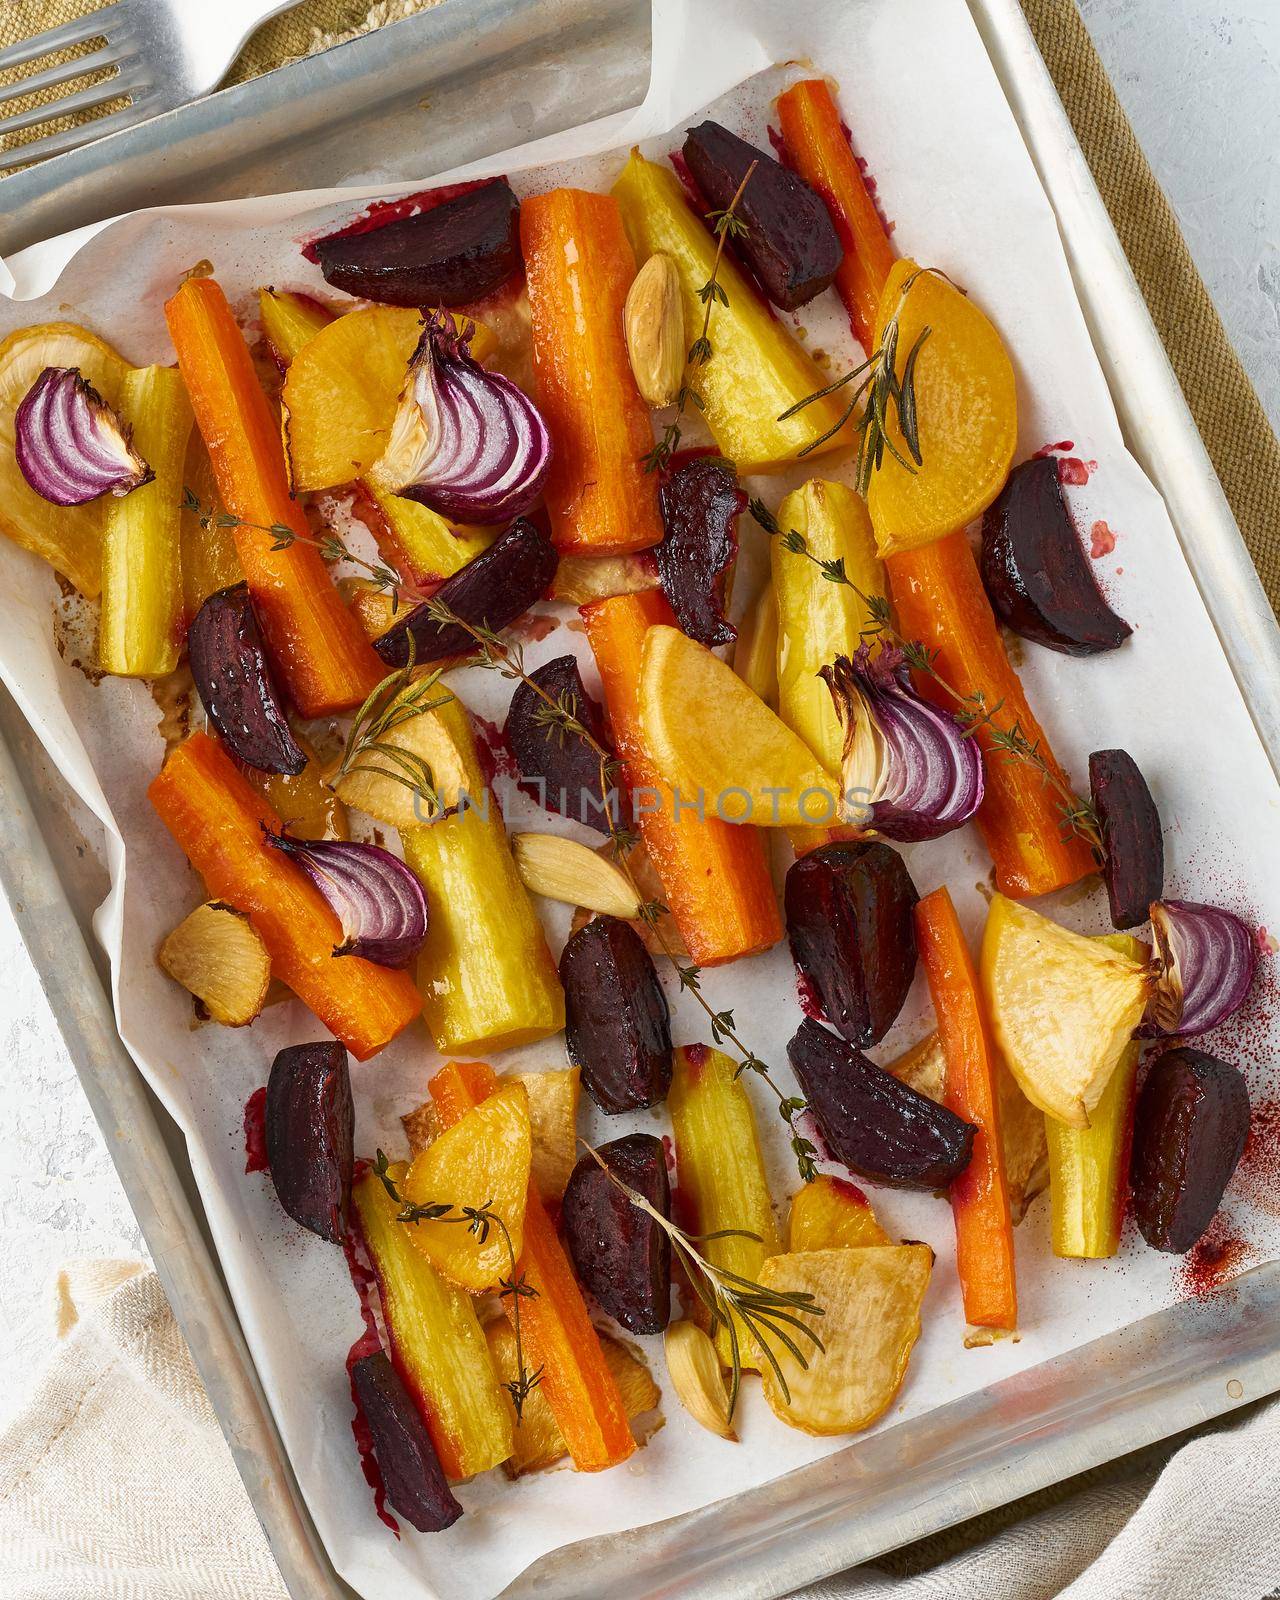 Colorful roasted vegetables on tray with parchment. Mix of carrots, beets, turnips by NataBene